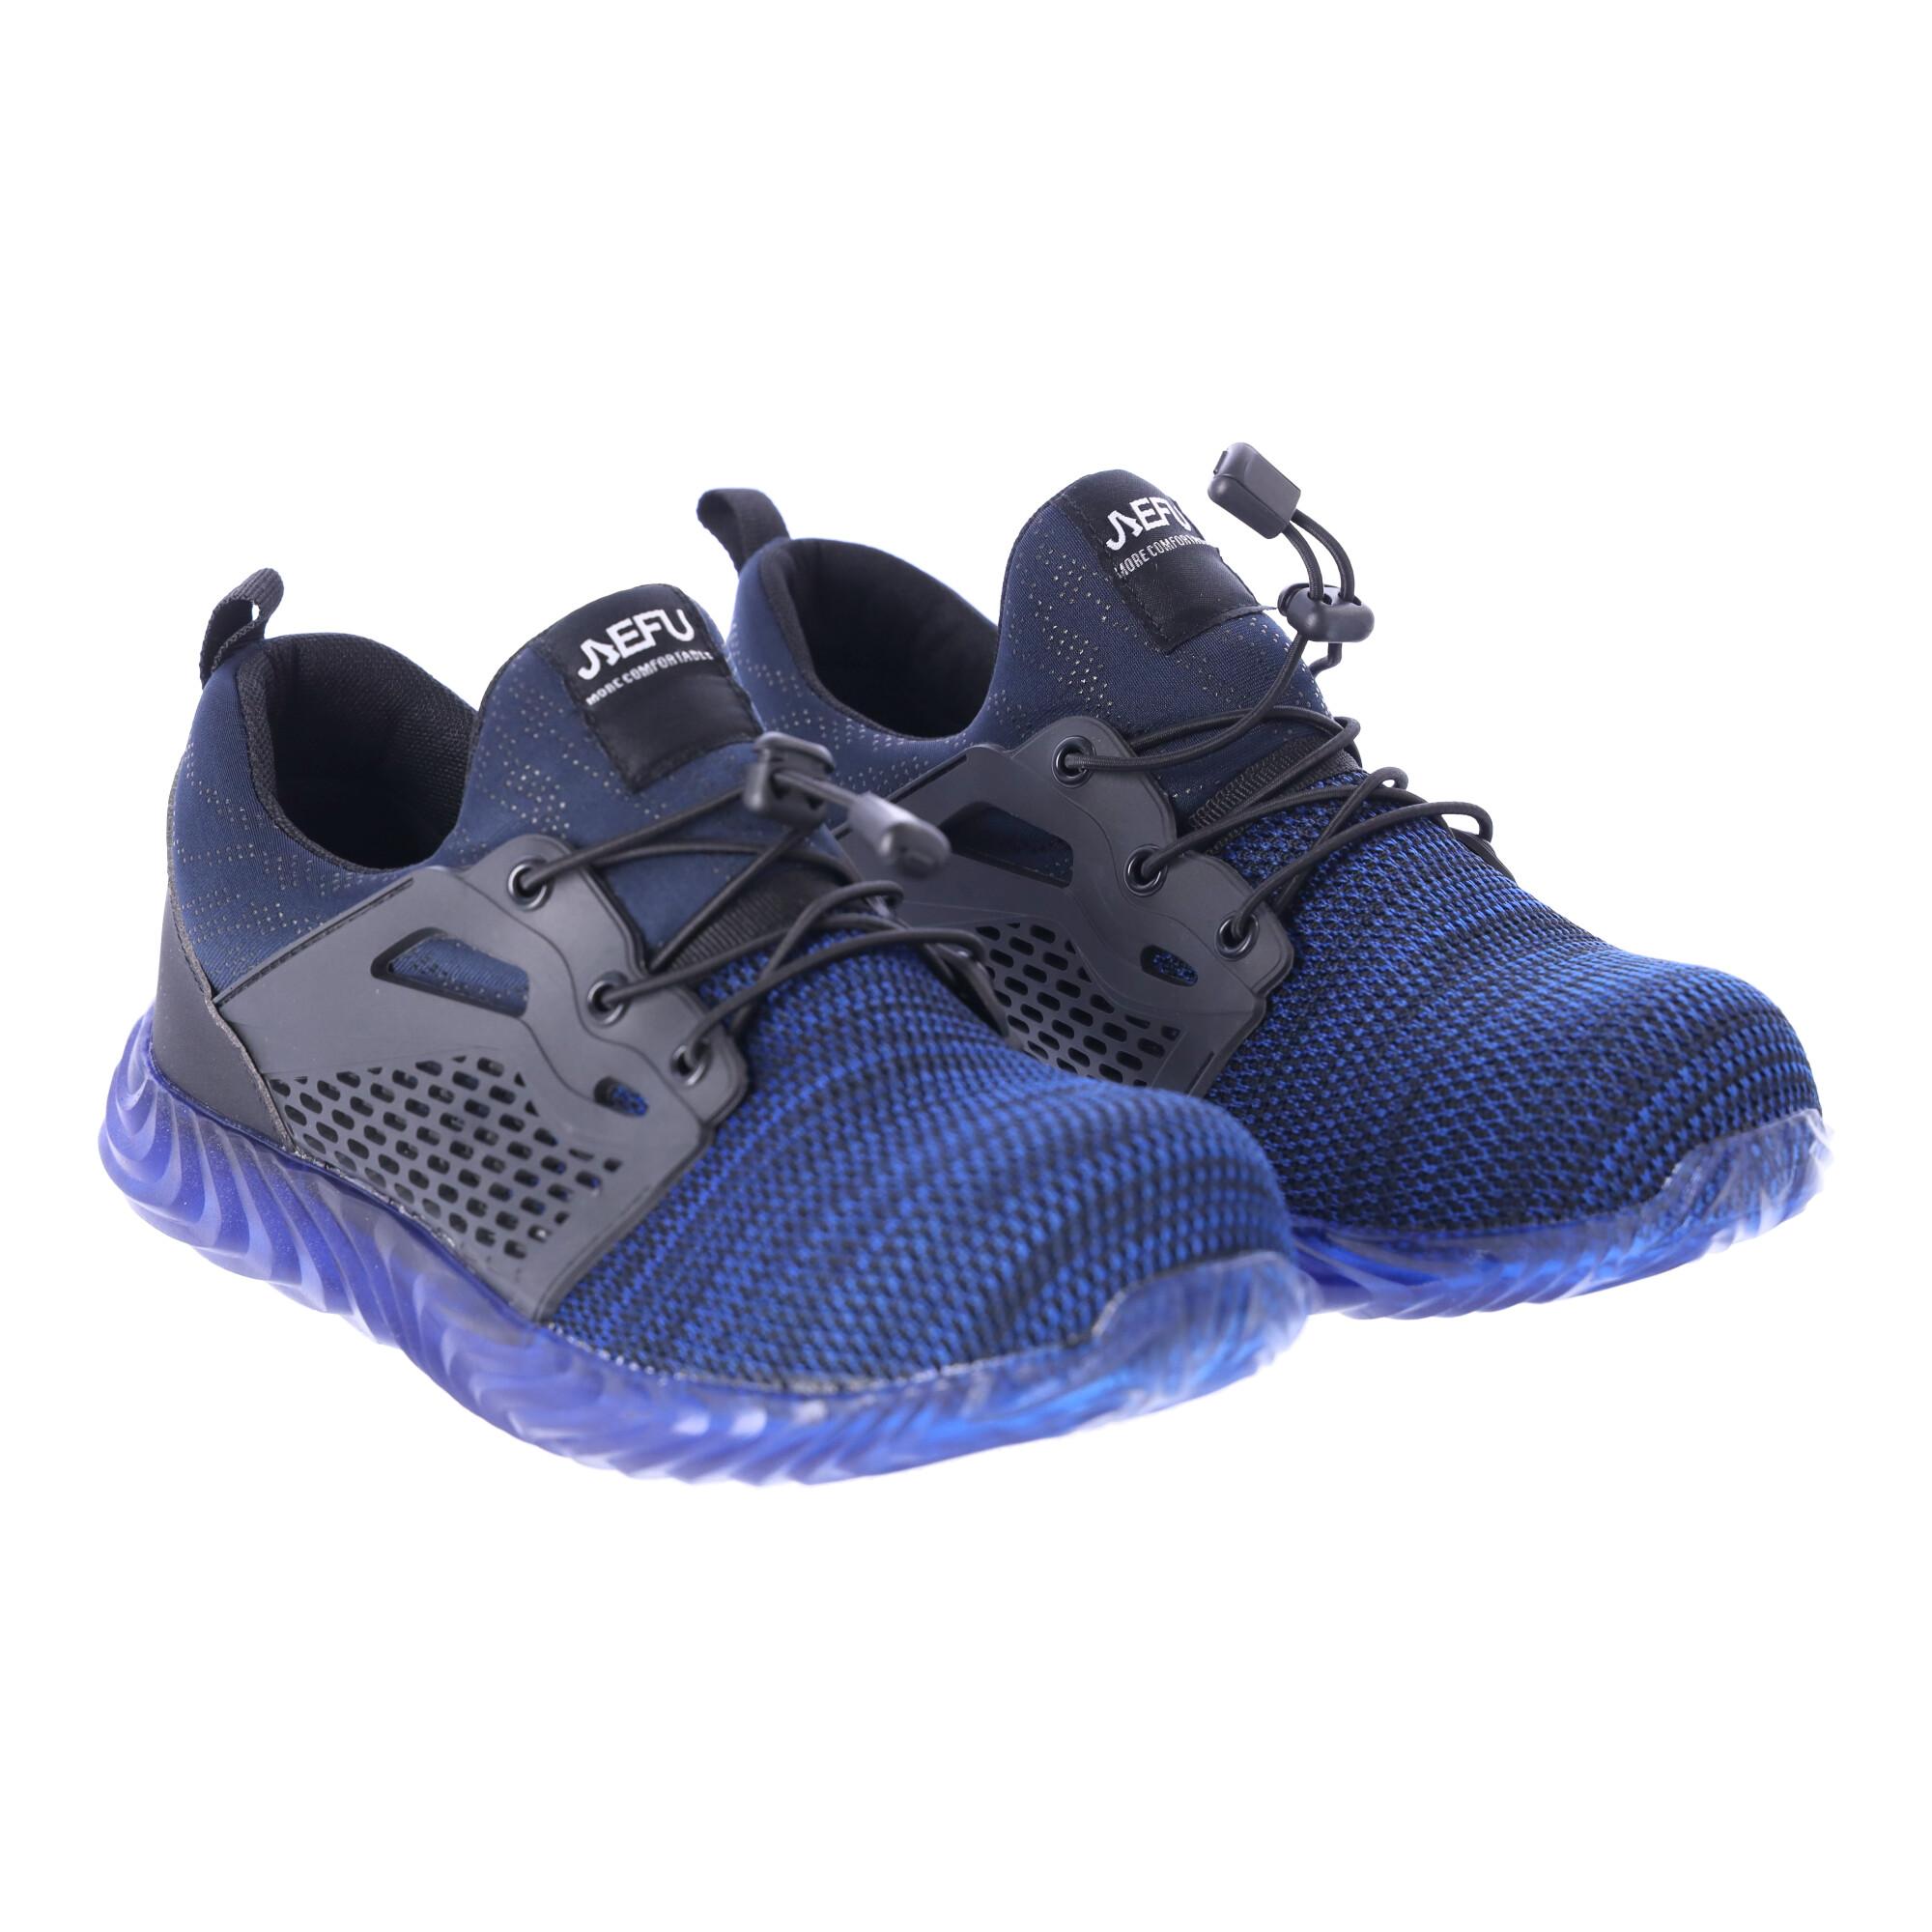 Work safety shoes "41" - navy blue